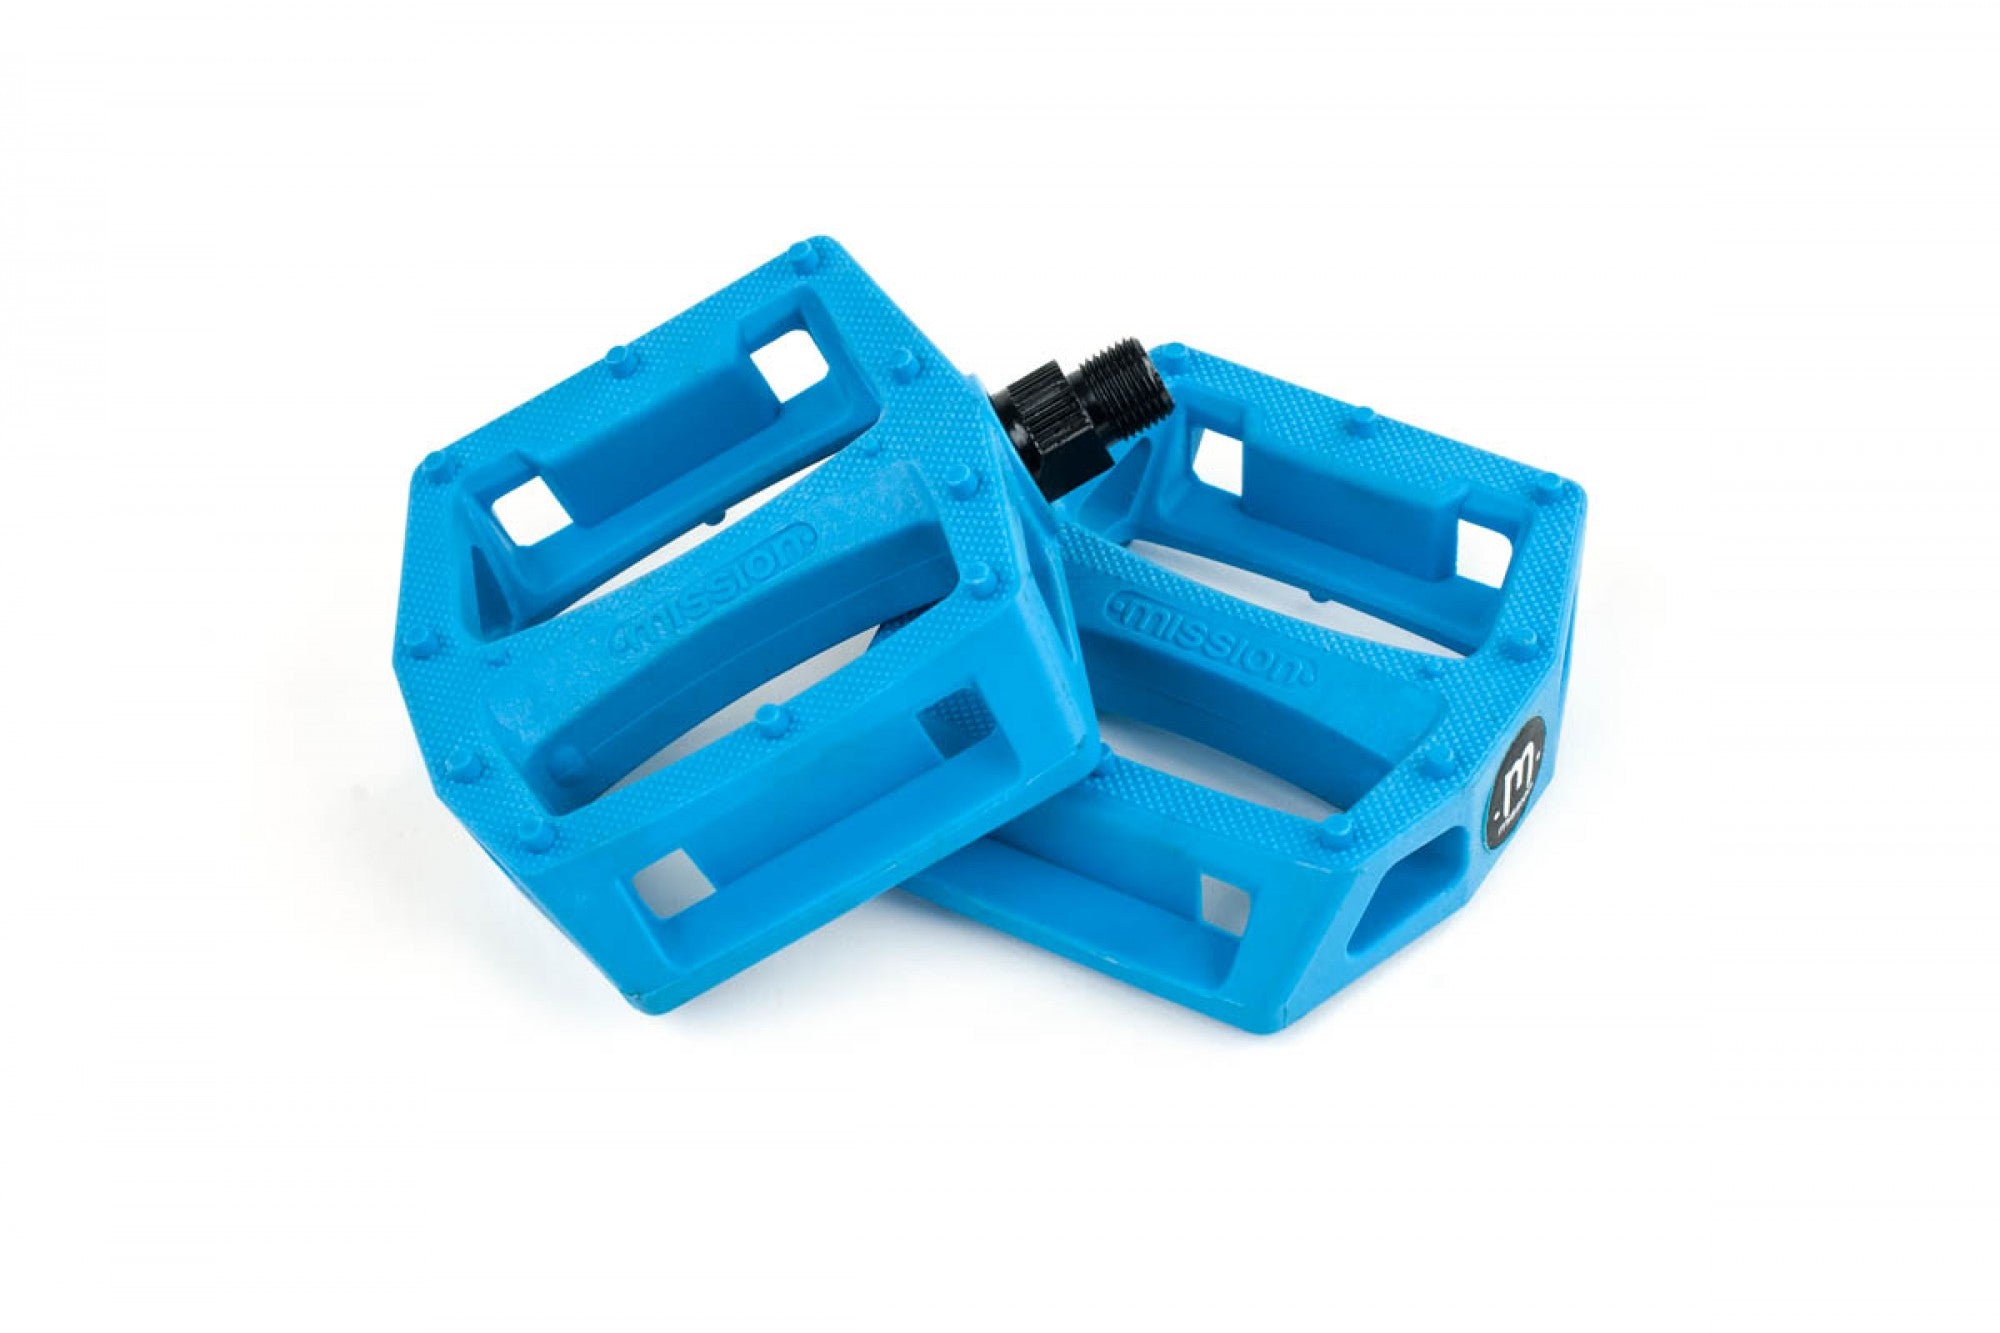 Mission Impulse Pedals (Various Colors) - Downtown Bicycle Works 